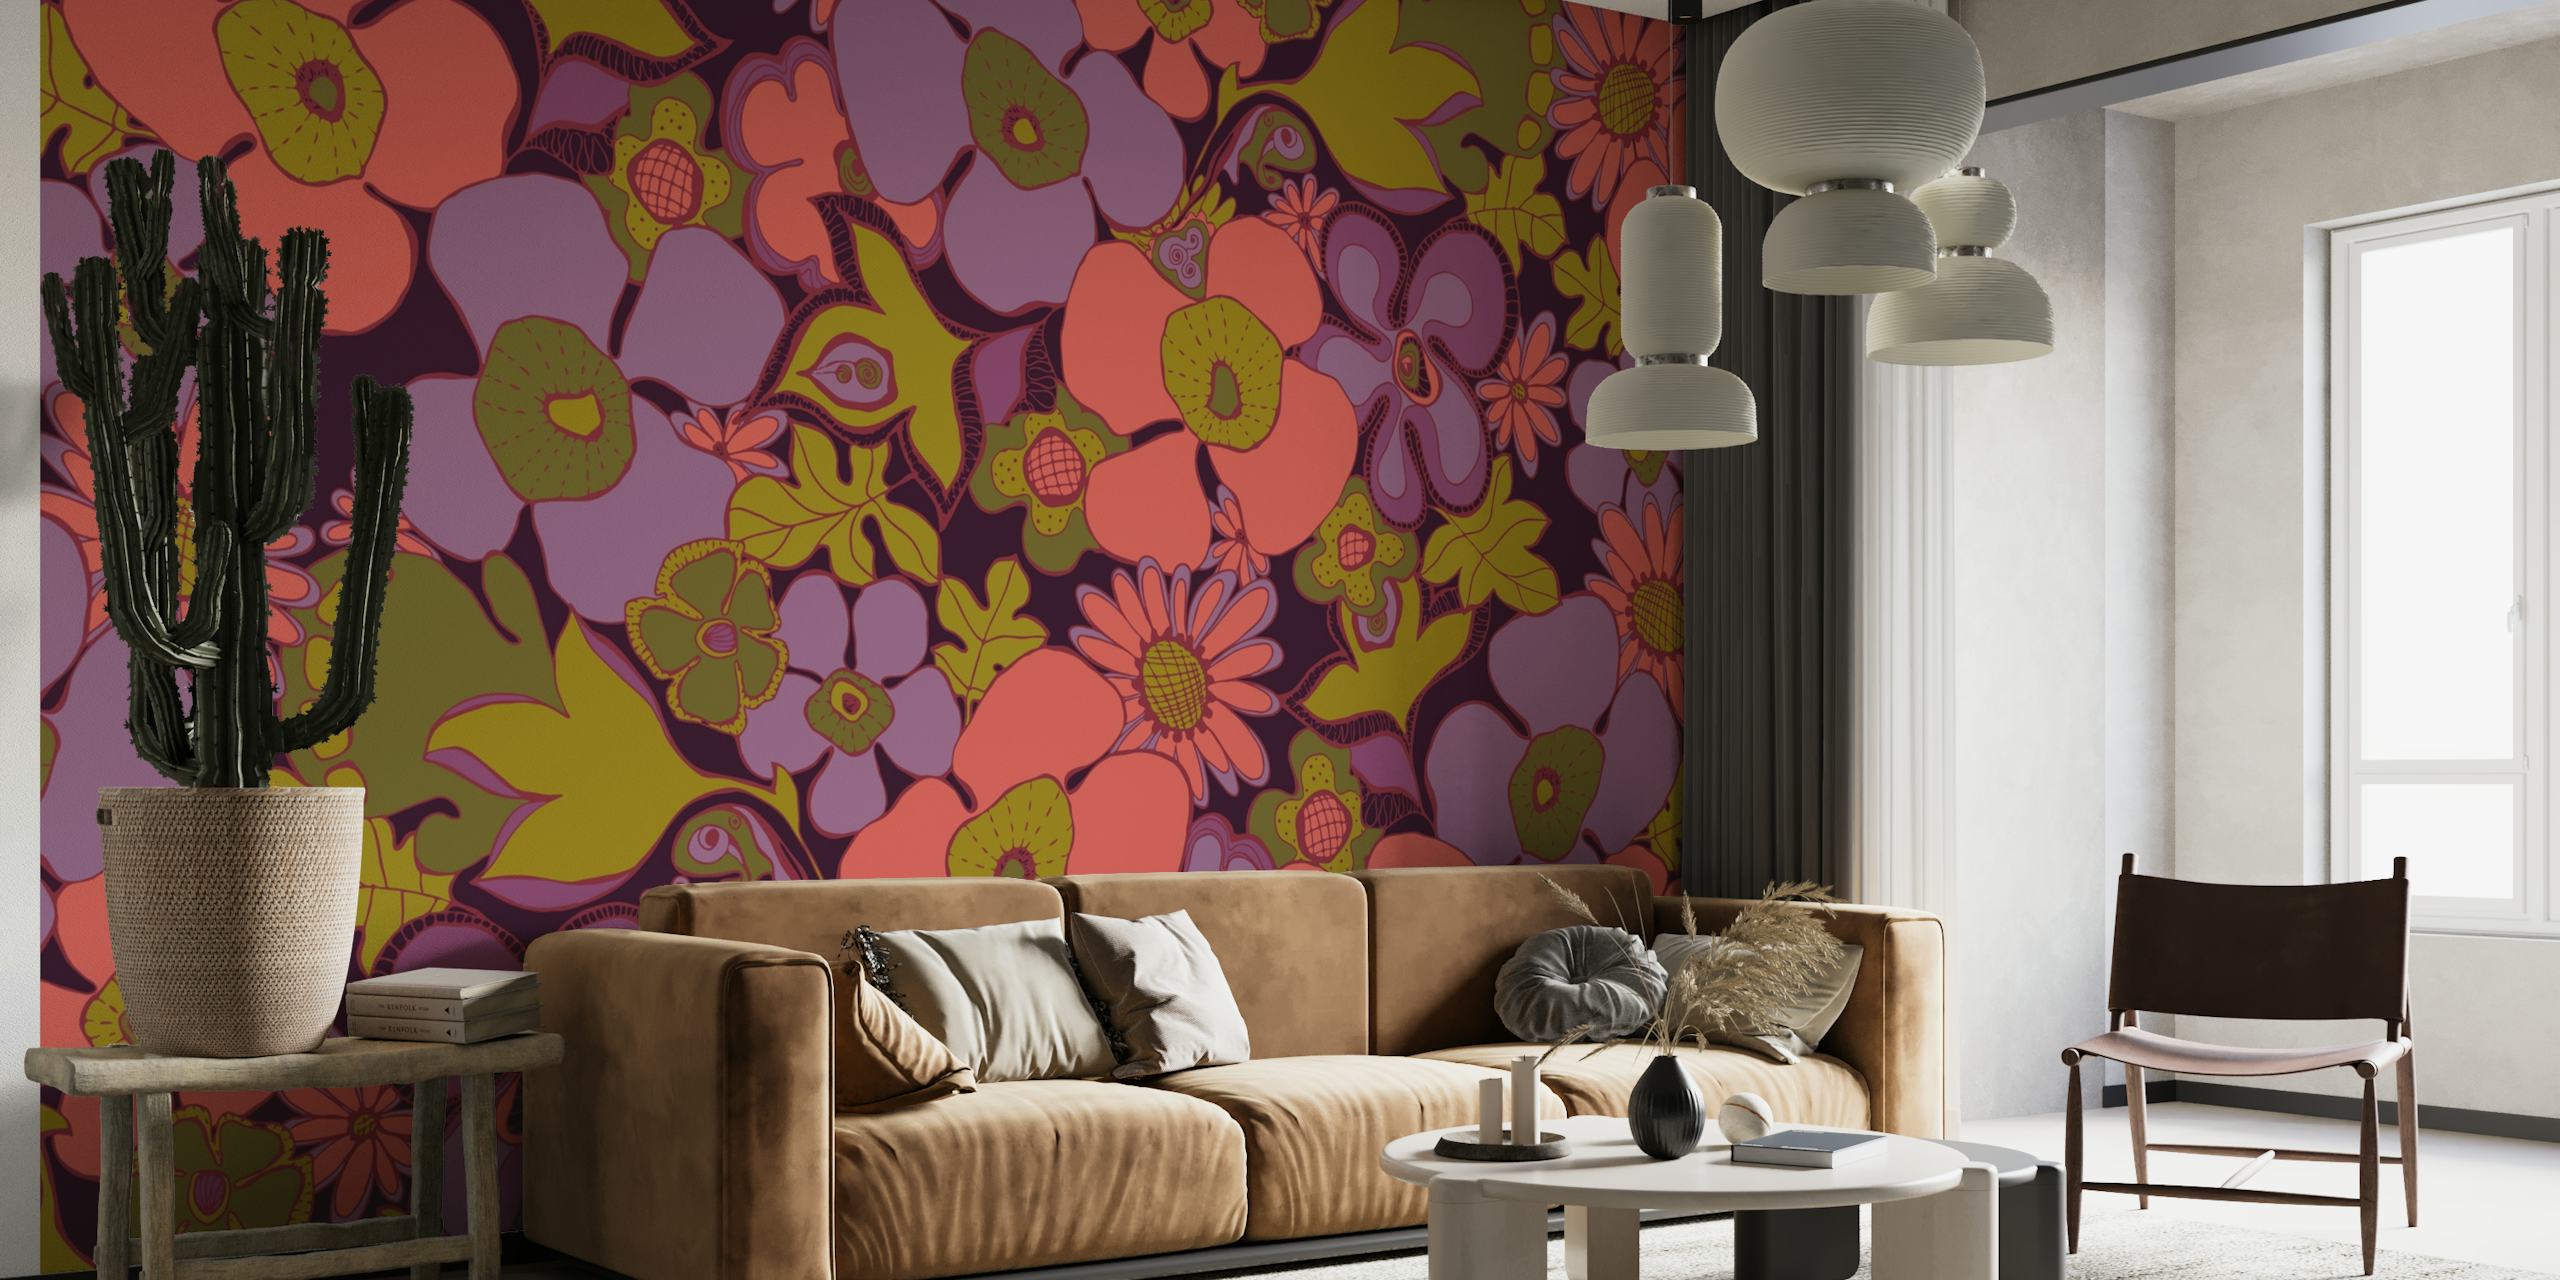 Floral Doodles wall mural in olive and purple shades